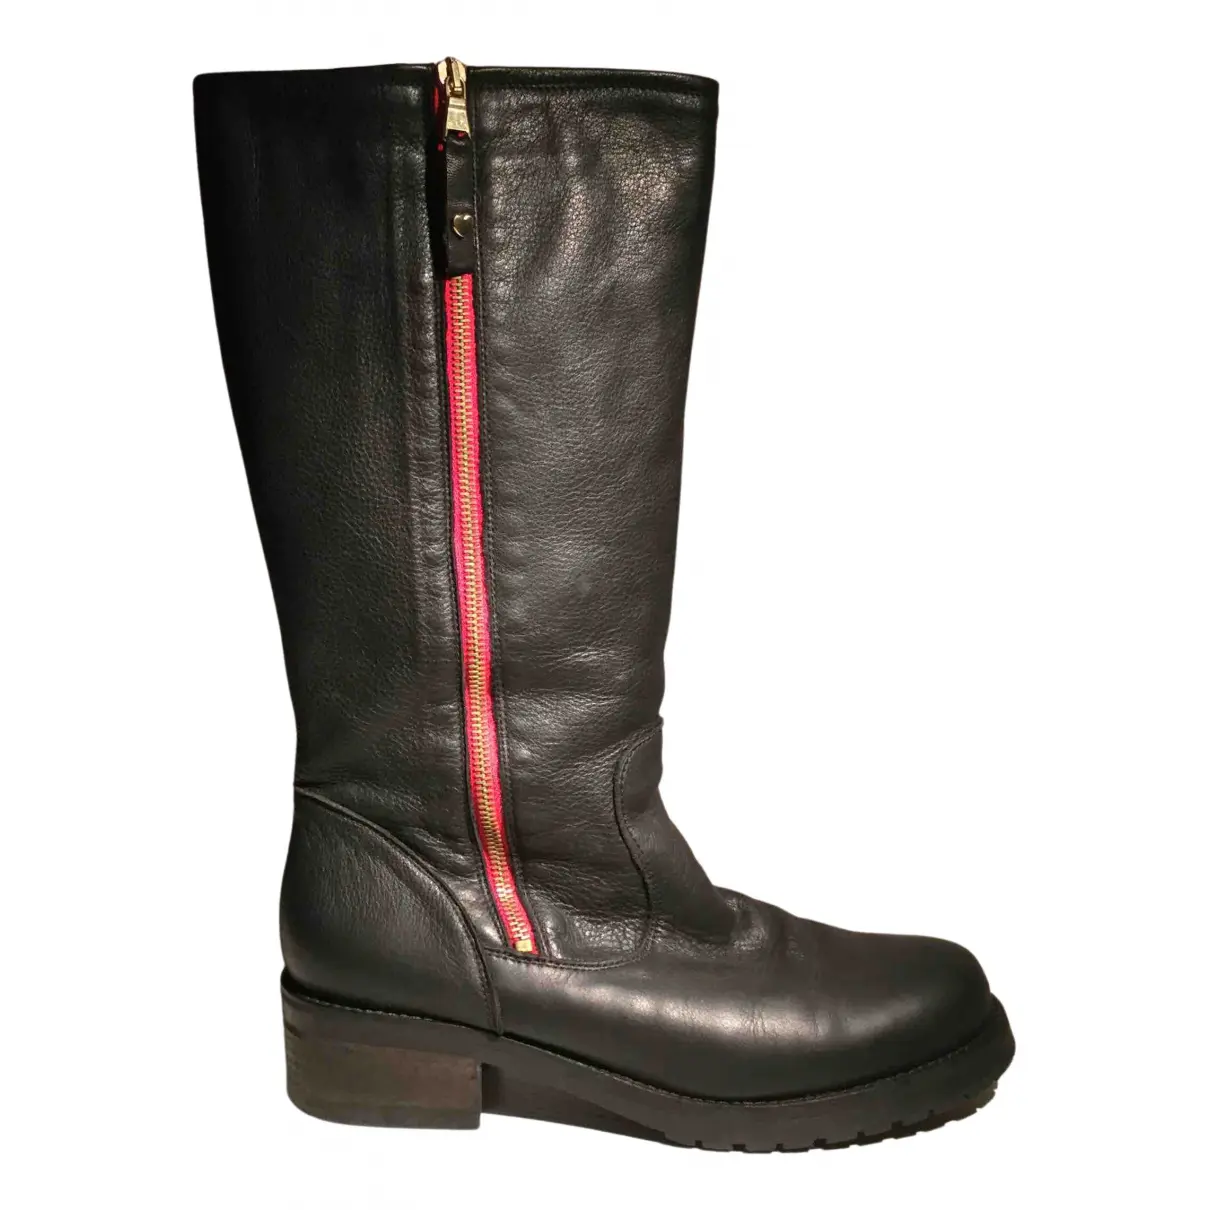 Leather biker boots Moschino Love